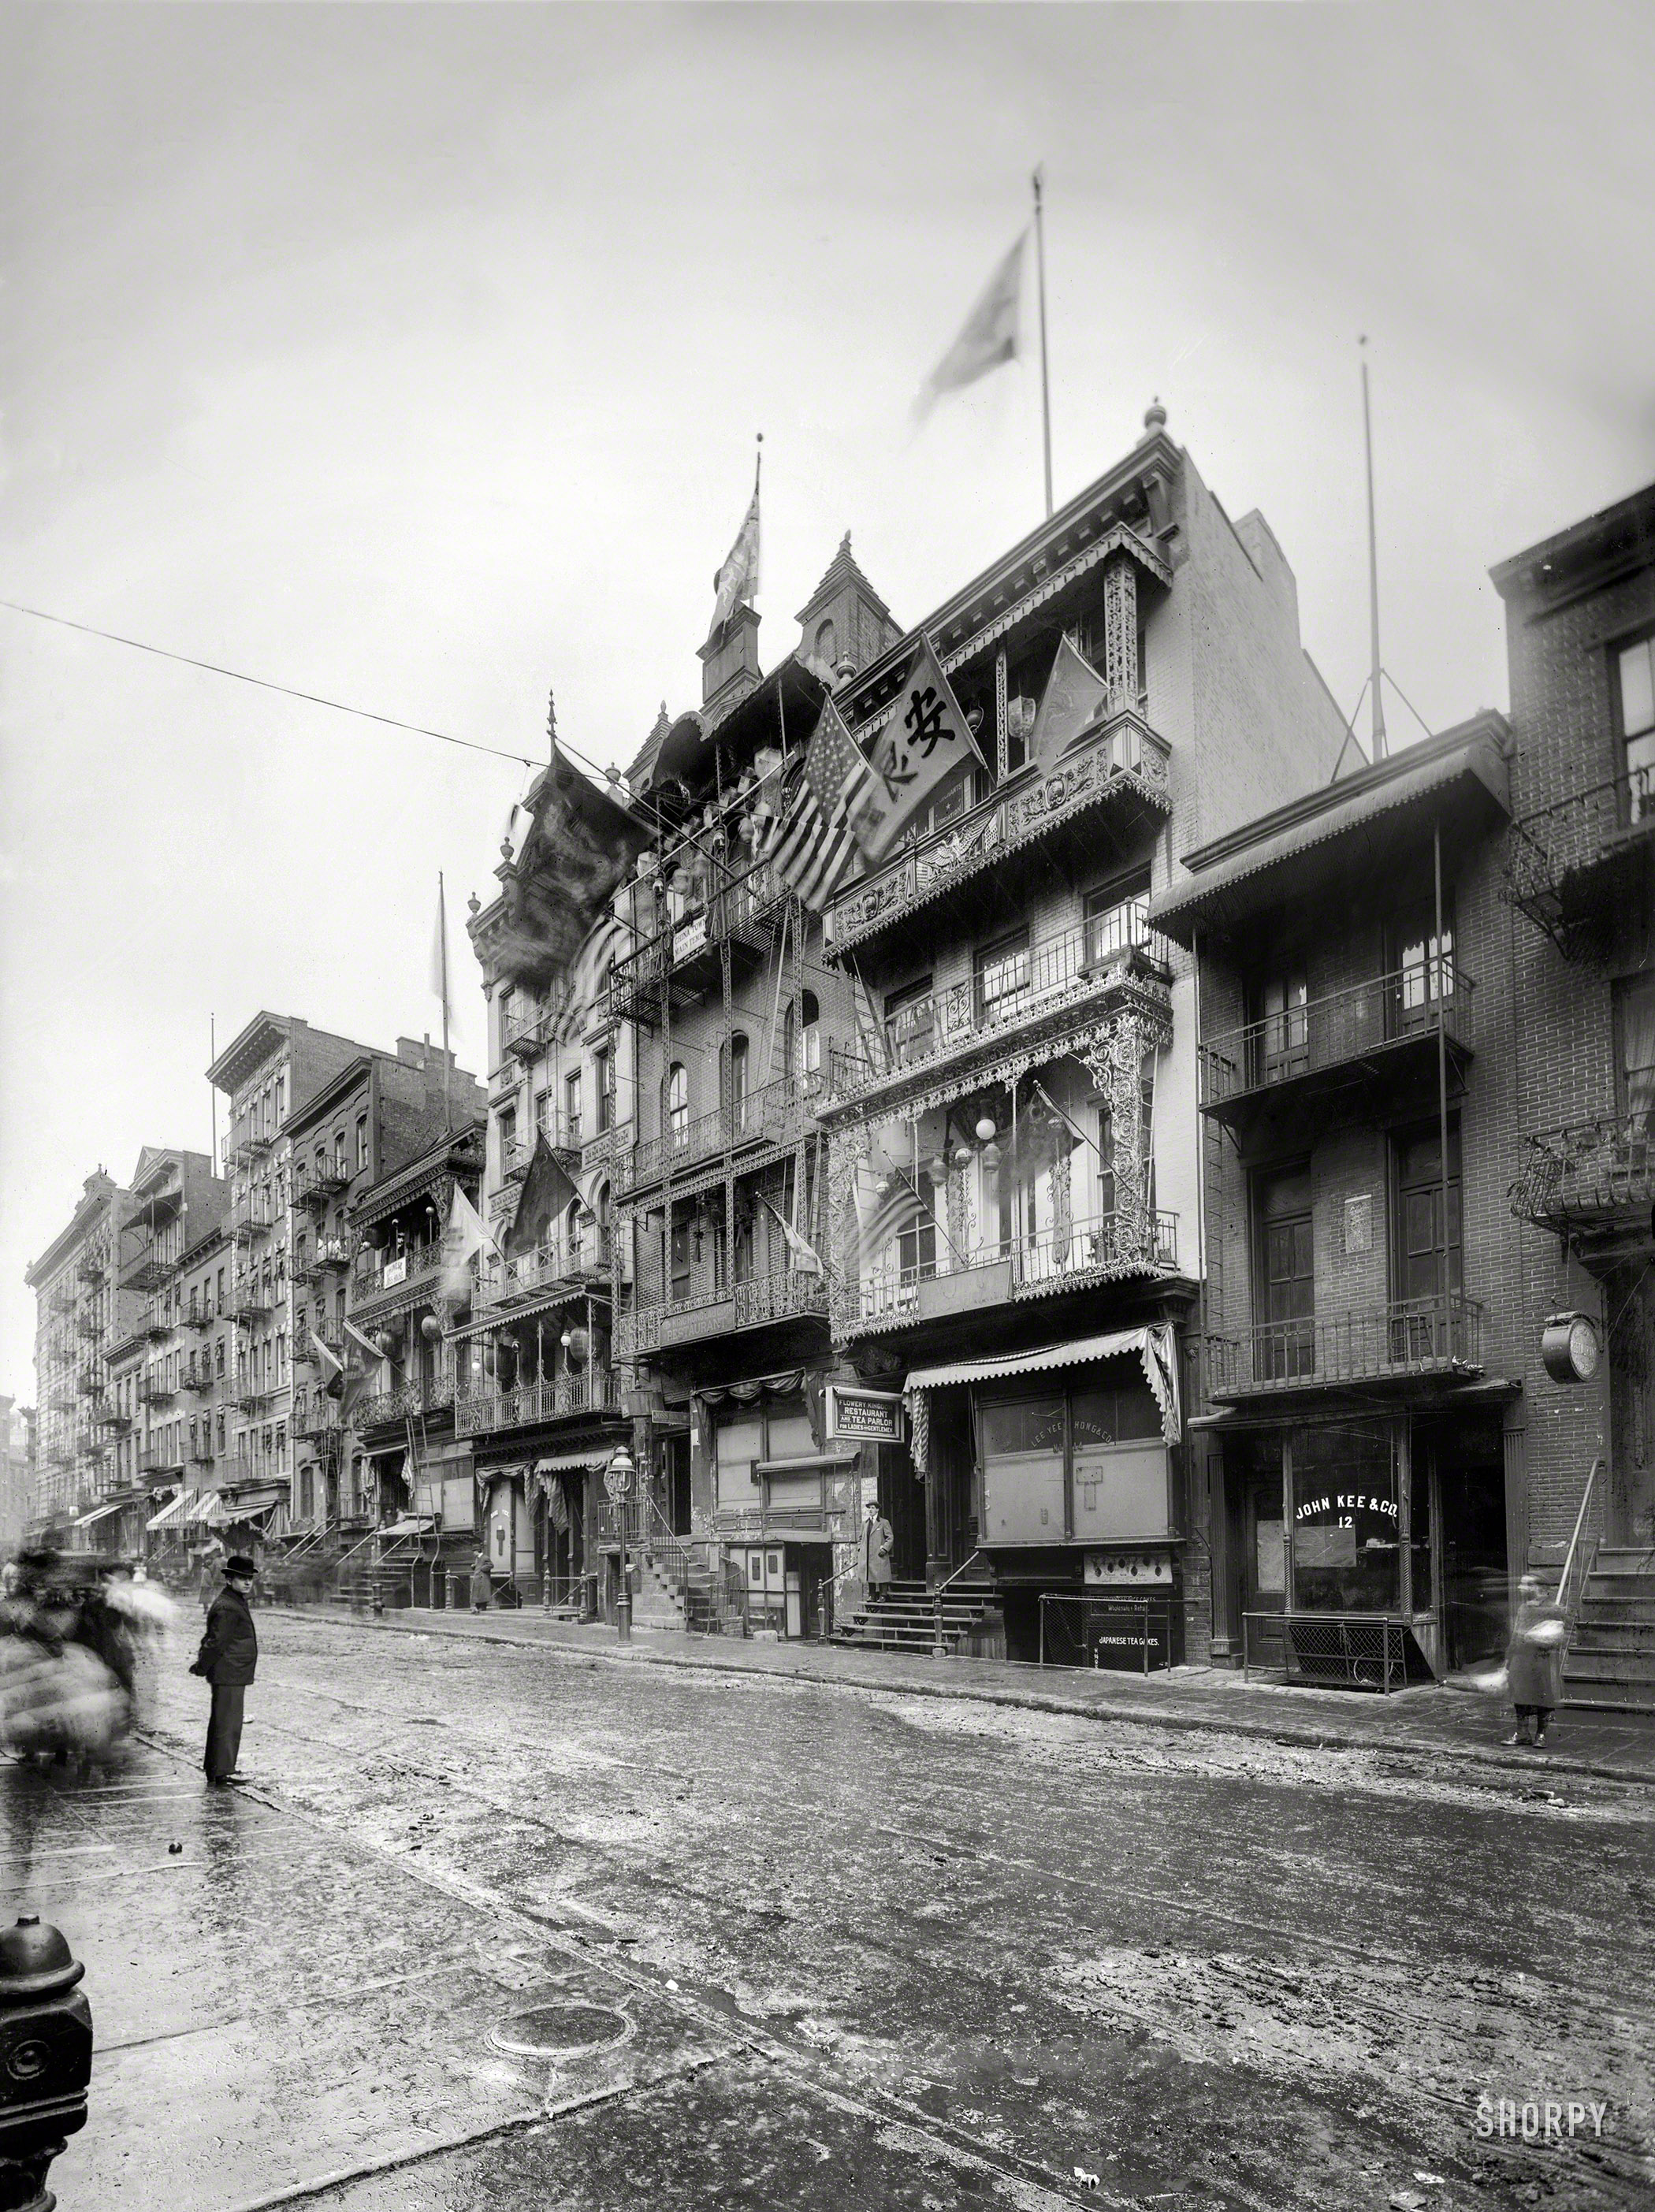 January 30, 1911. New York. "New Year's decorations in Chinatown on Mott Street." 8x10 inch glass negative, Bain News Service. View full size.